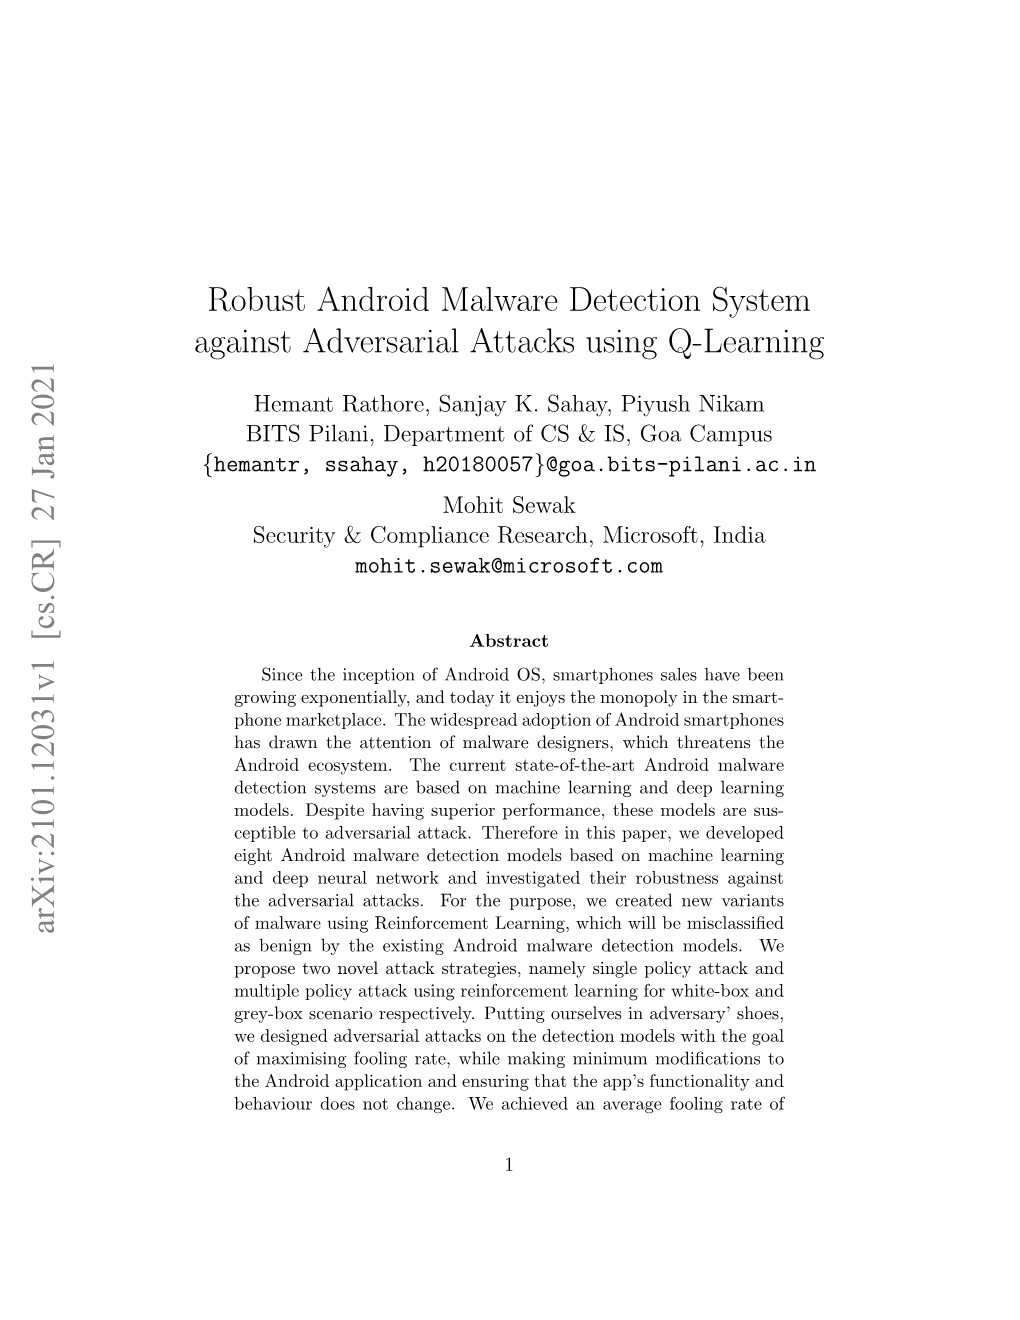 Robust Android Malware Detection System Against Adversarial Attacks Using Q-Learning